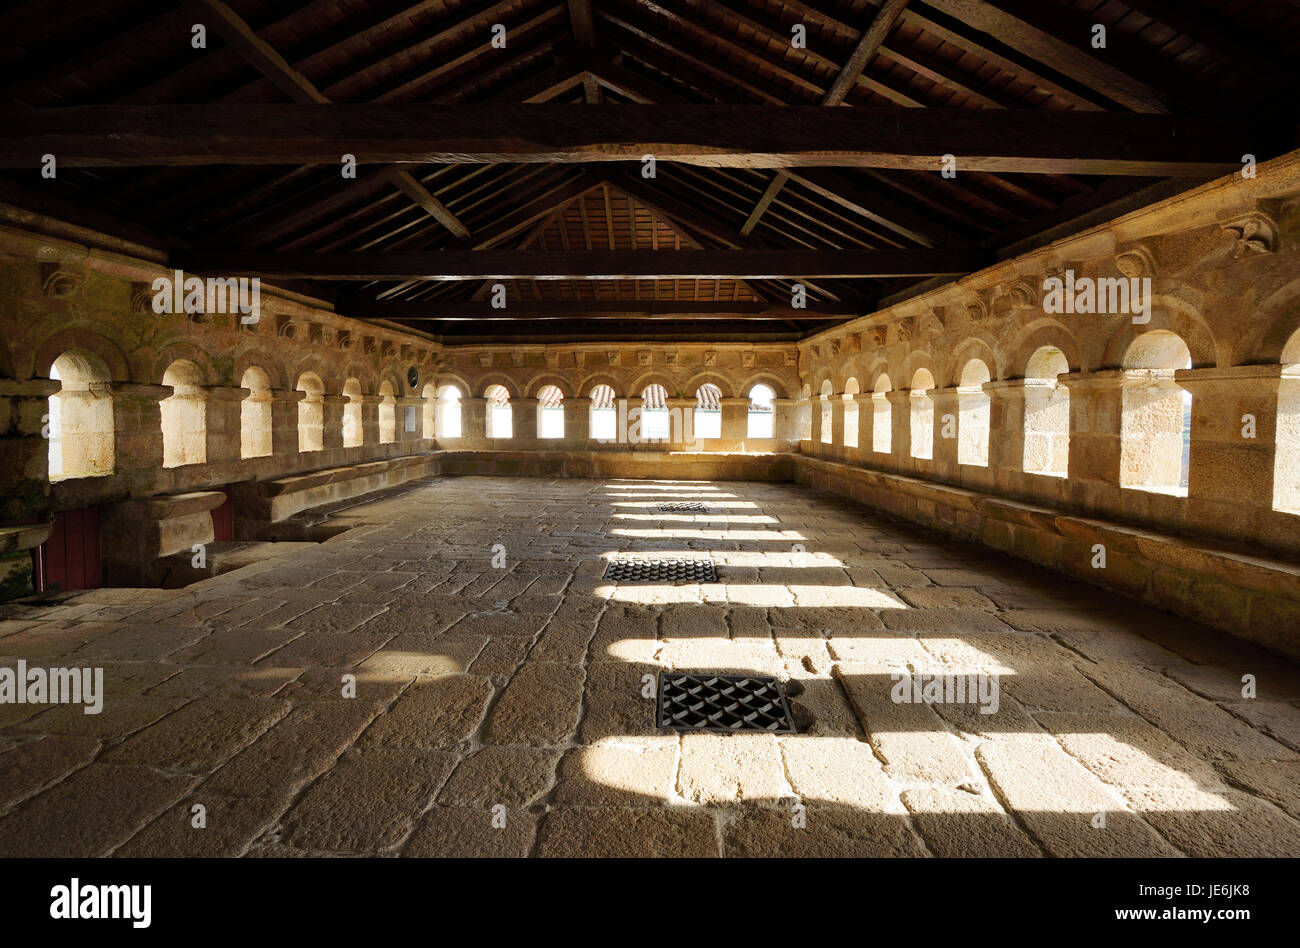 The romanic meeting hall of the city council (Domus Municipalis) of Bragança, dating back to the 12th century. Portugal Stock Photo